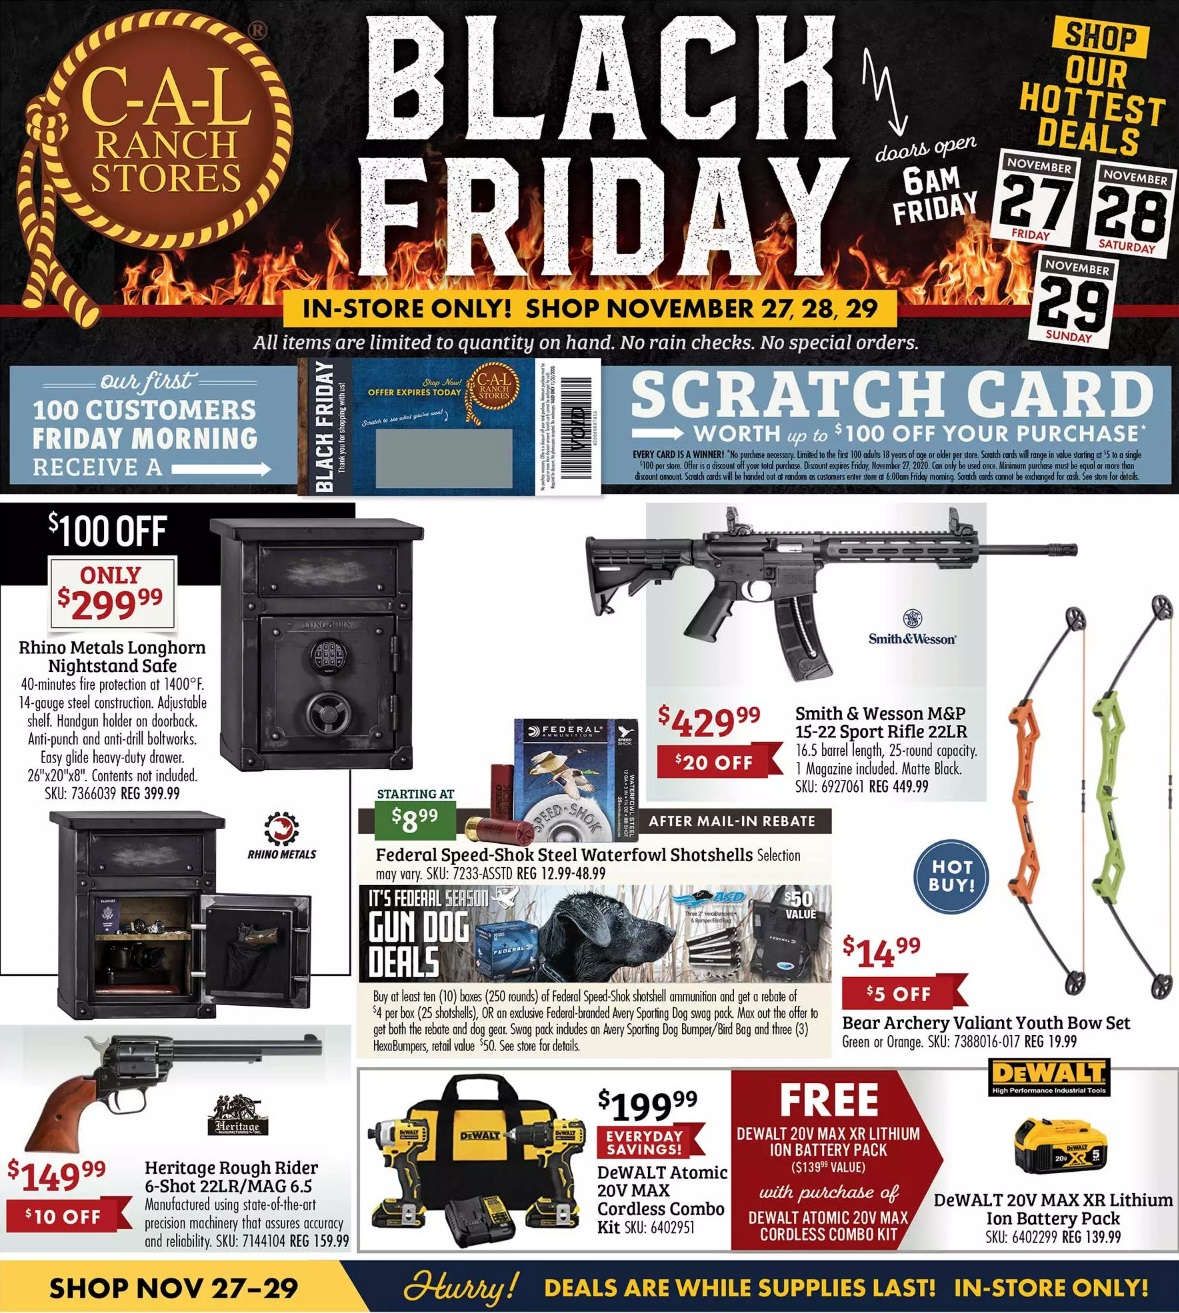 Cal Ranch Stores 2020 Black Friday Ad Frugal Buzz